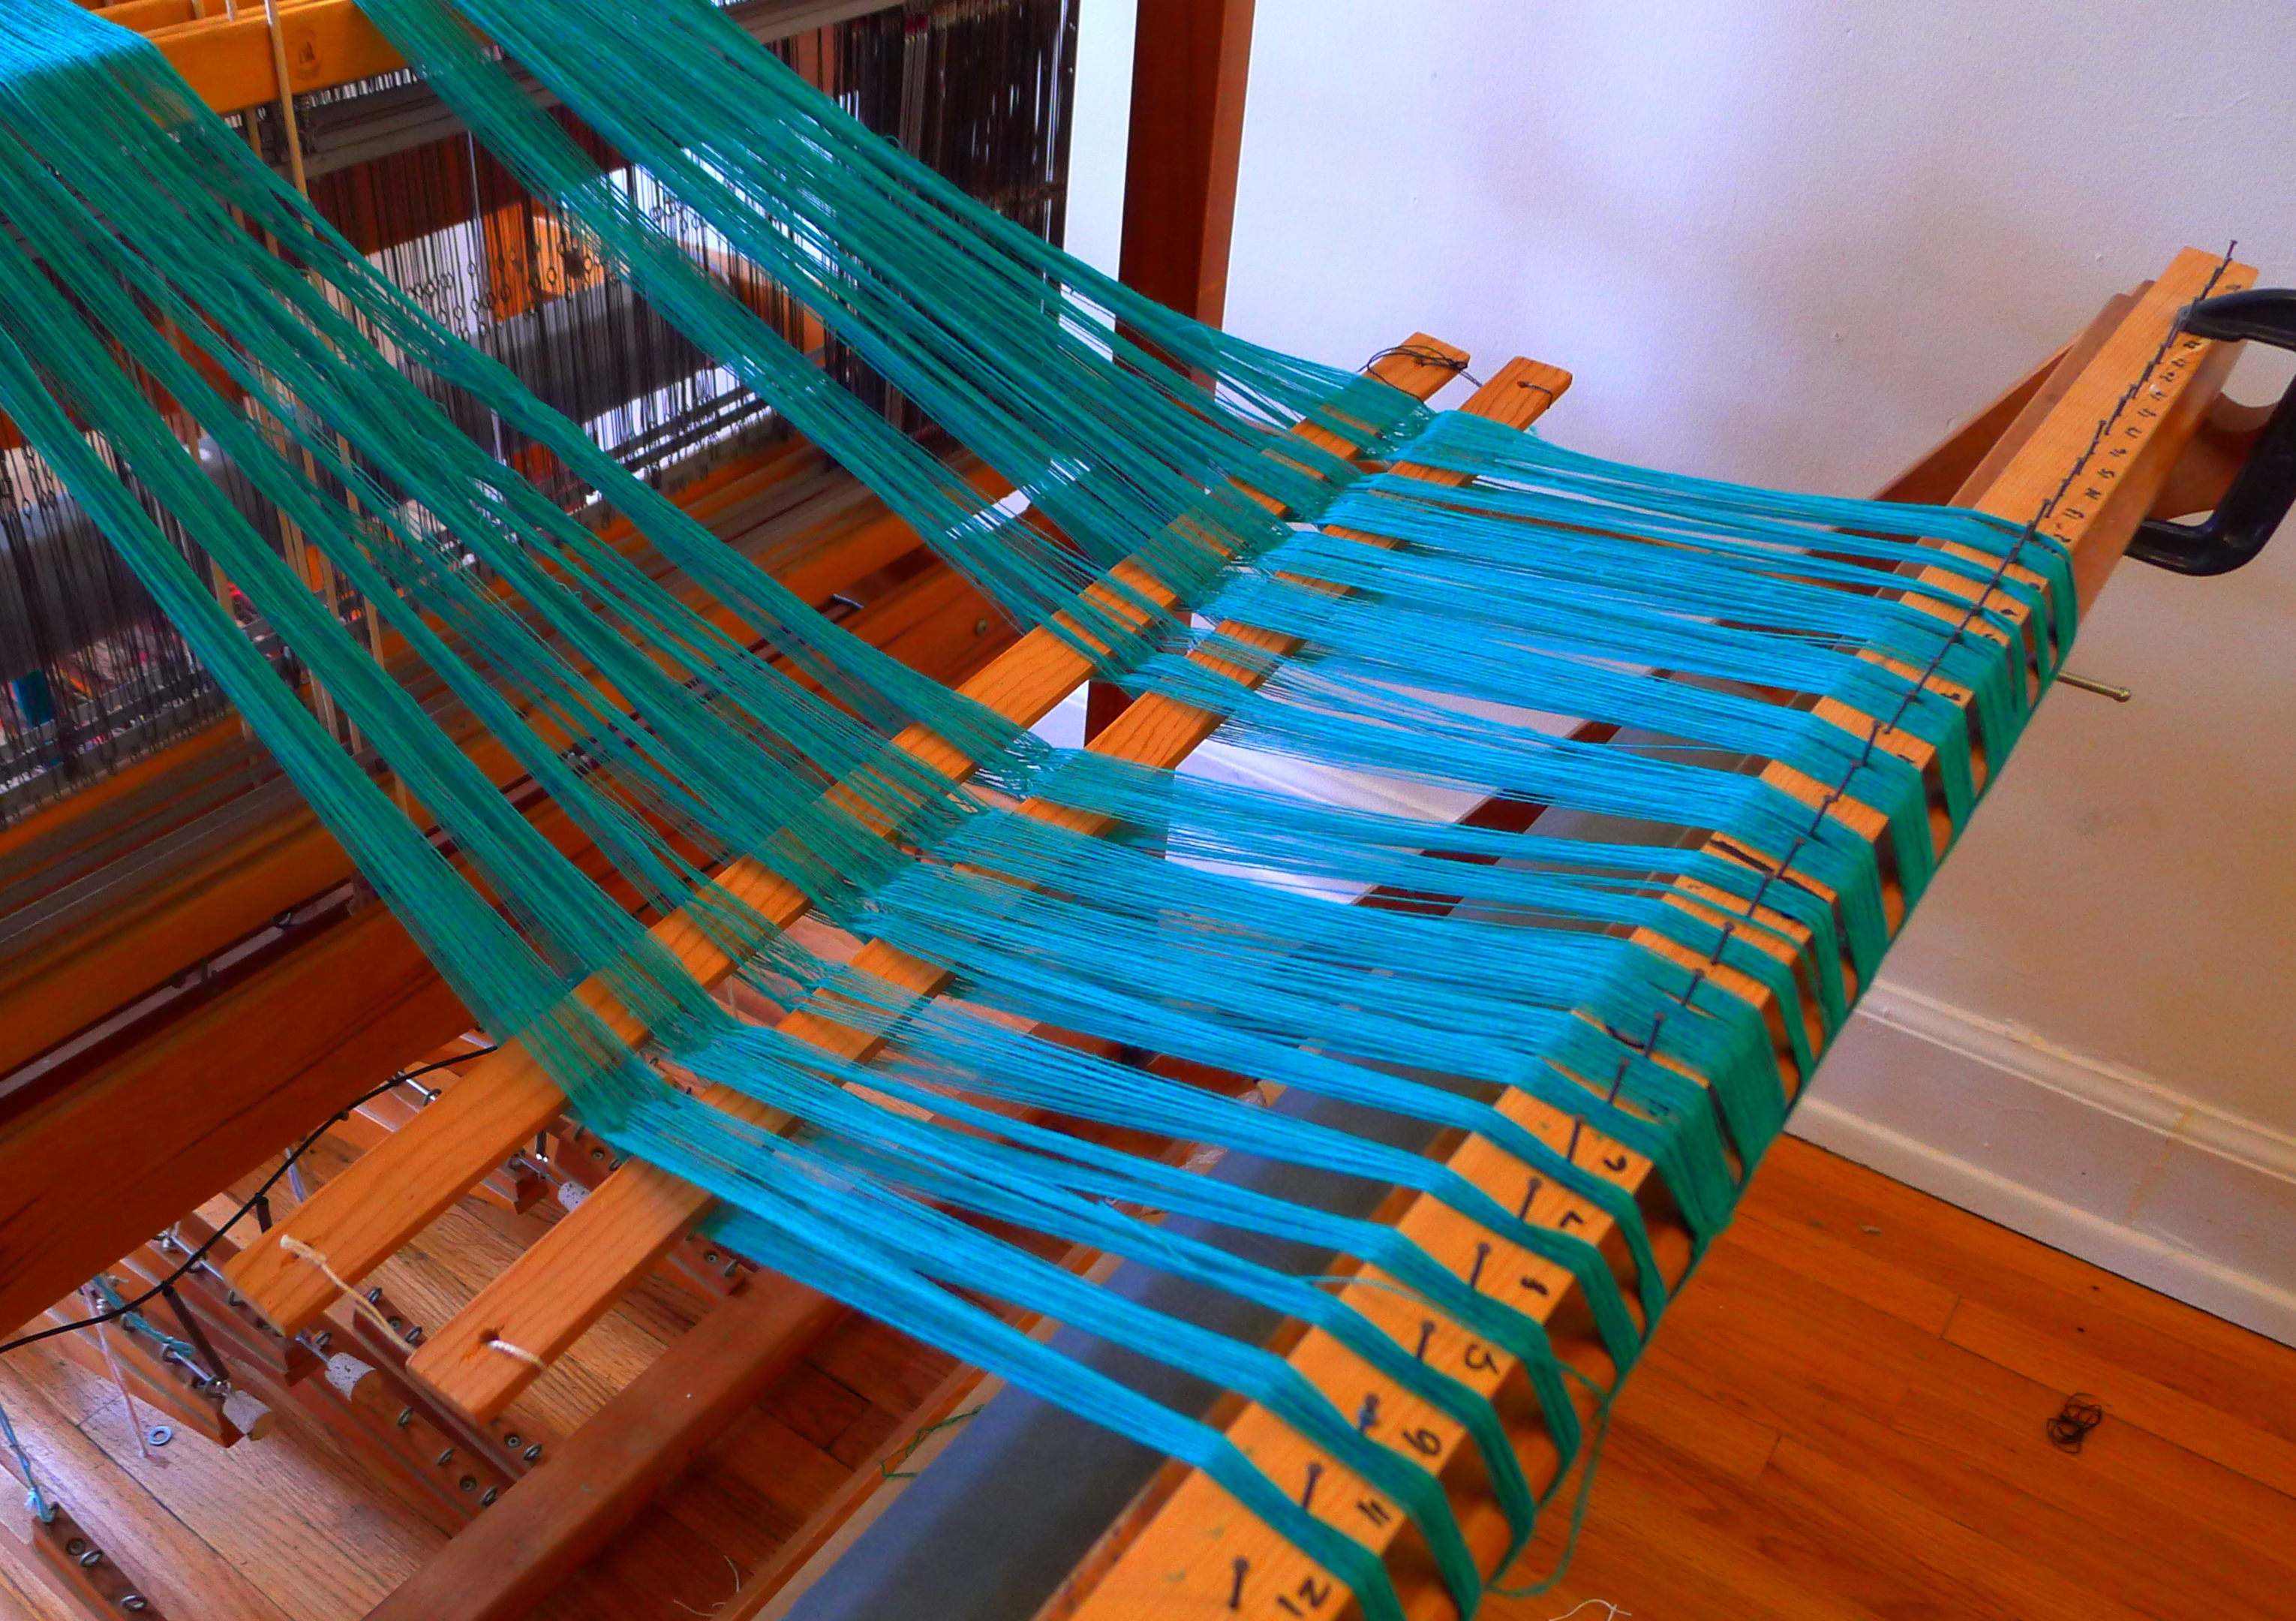 The back of the loom with the warp winding on.